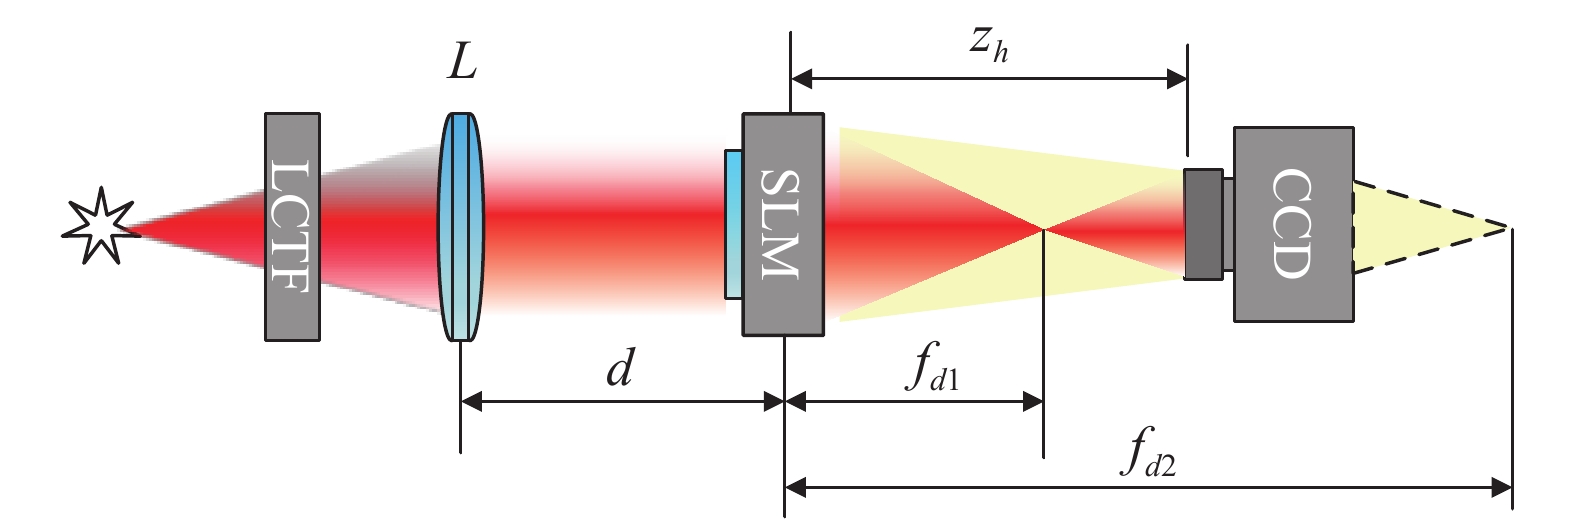 Optical path diagram of FINCH record. LCTF, liquid crystal tunable filter; SLM, spatial light modulator; CCD, charge-coupled device